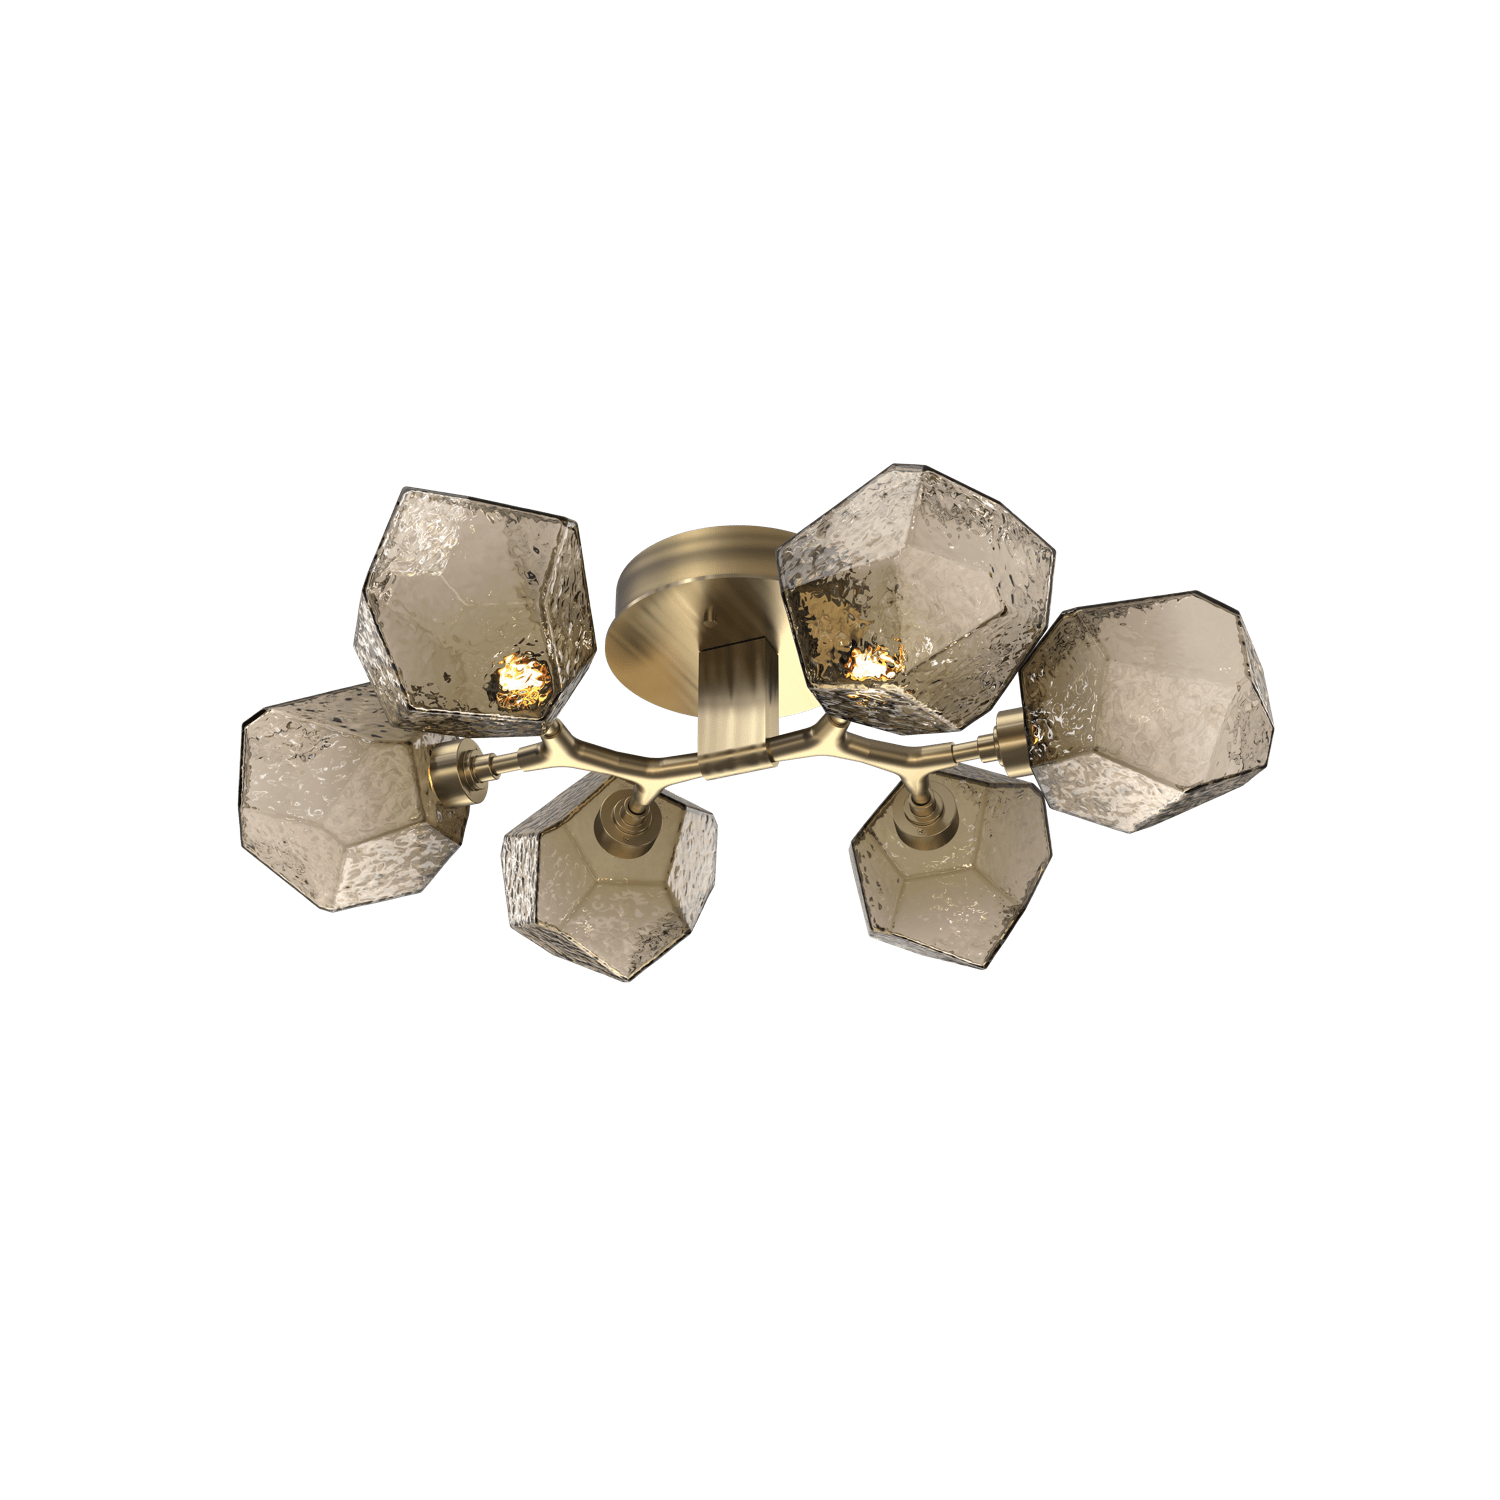 CLB0039-01-HB-B-Hammerton-Studio-Gem-6-light-organic-flush-mount-light-with-heritage-brass-finish-and-bronze-blown-glass-shades-and-LED-lamping